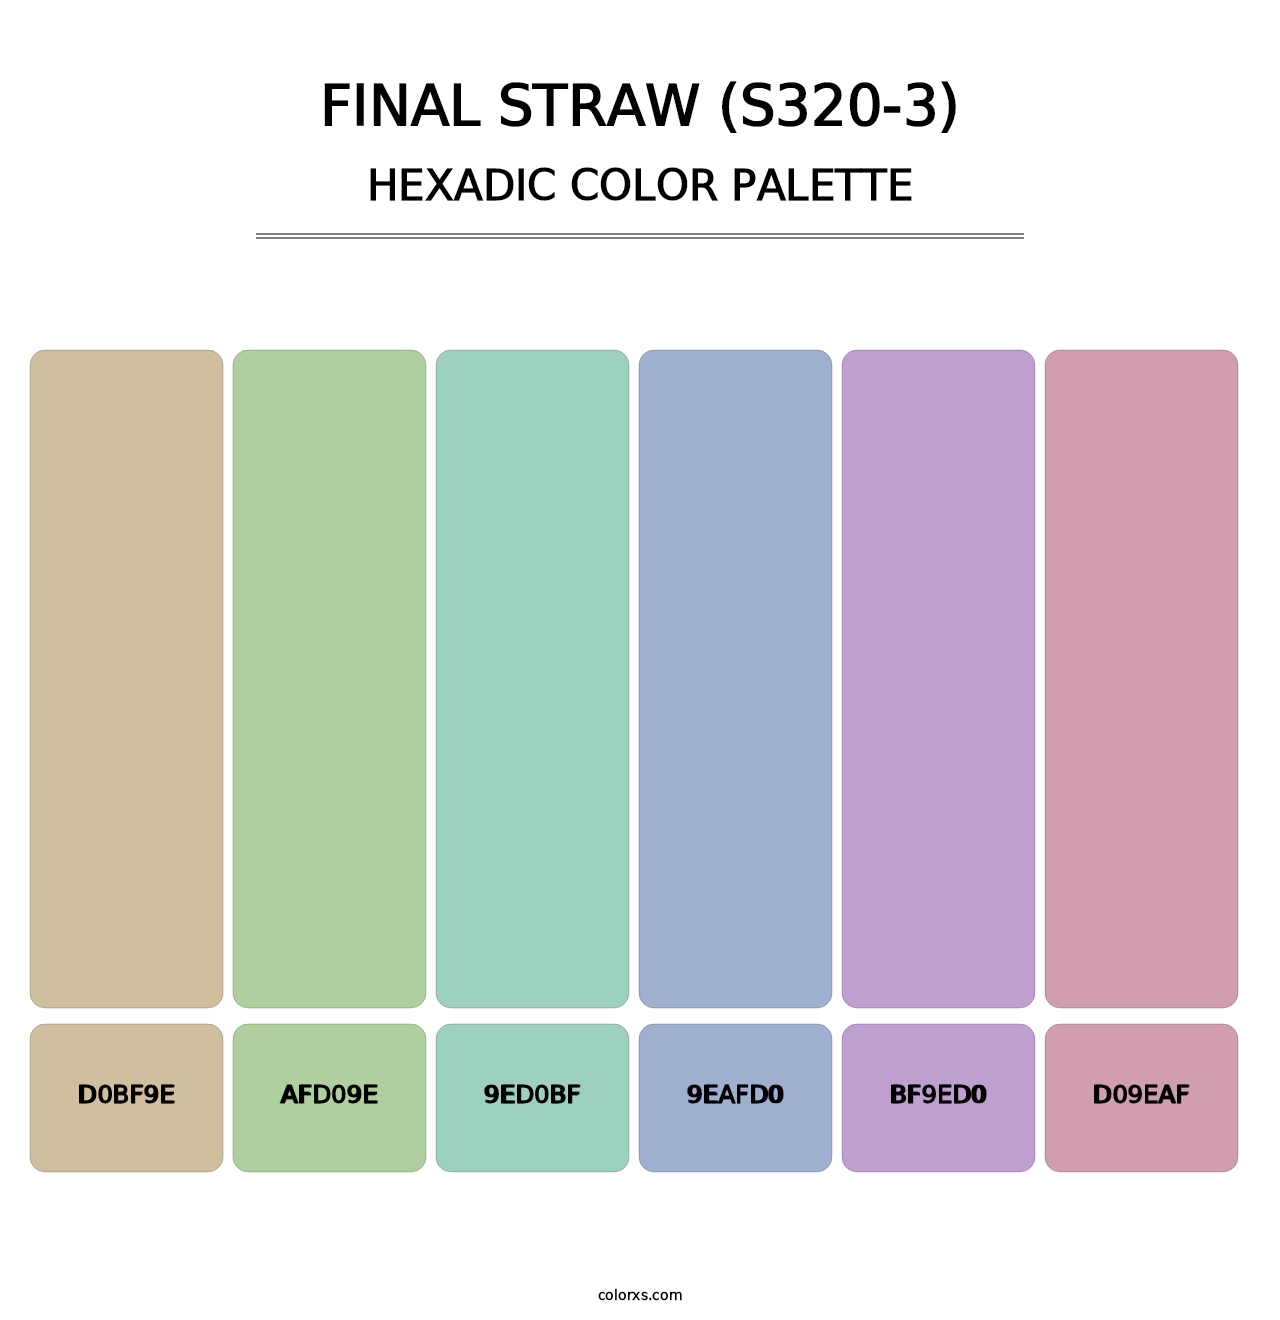 Final Straw (S320-3) - Hexadic Color Palette